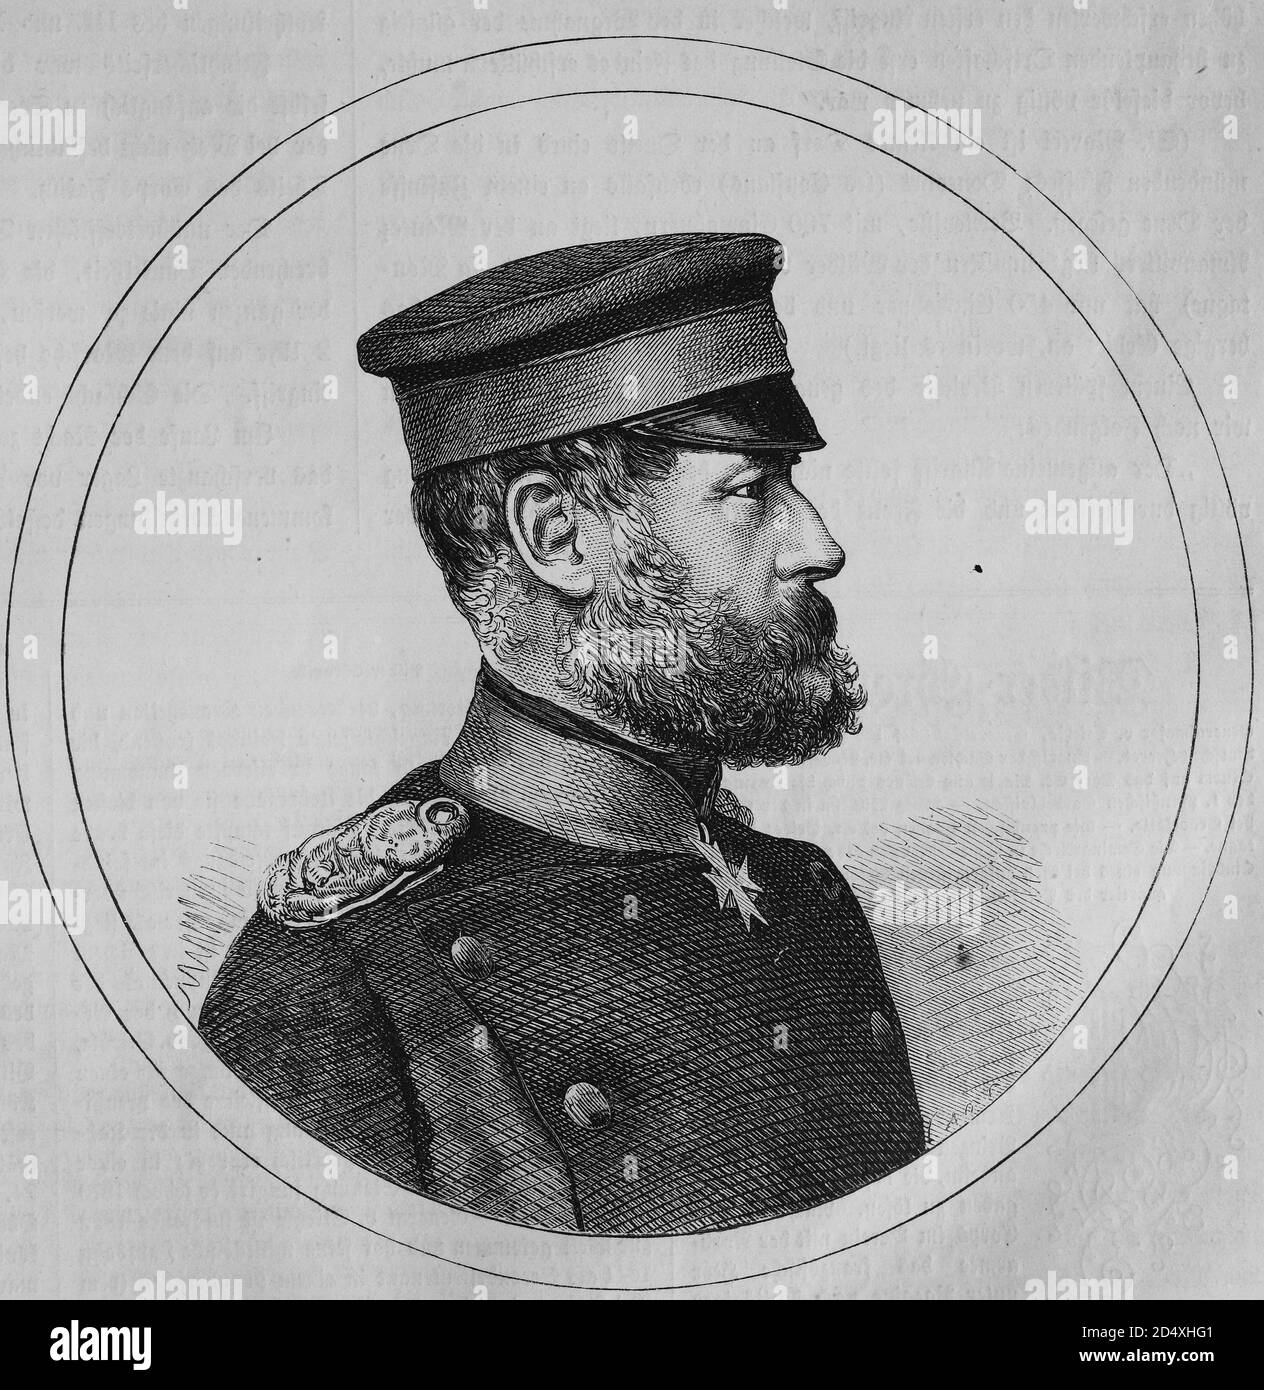 Major General von Stiehle, chief of staff of the 2nd division of the german army, illustrated war history, German - French war 1870-1871 Stock Photo